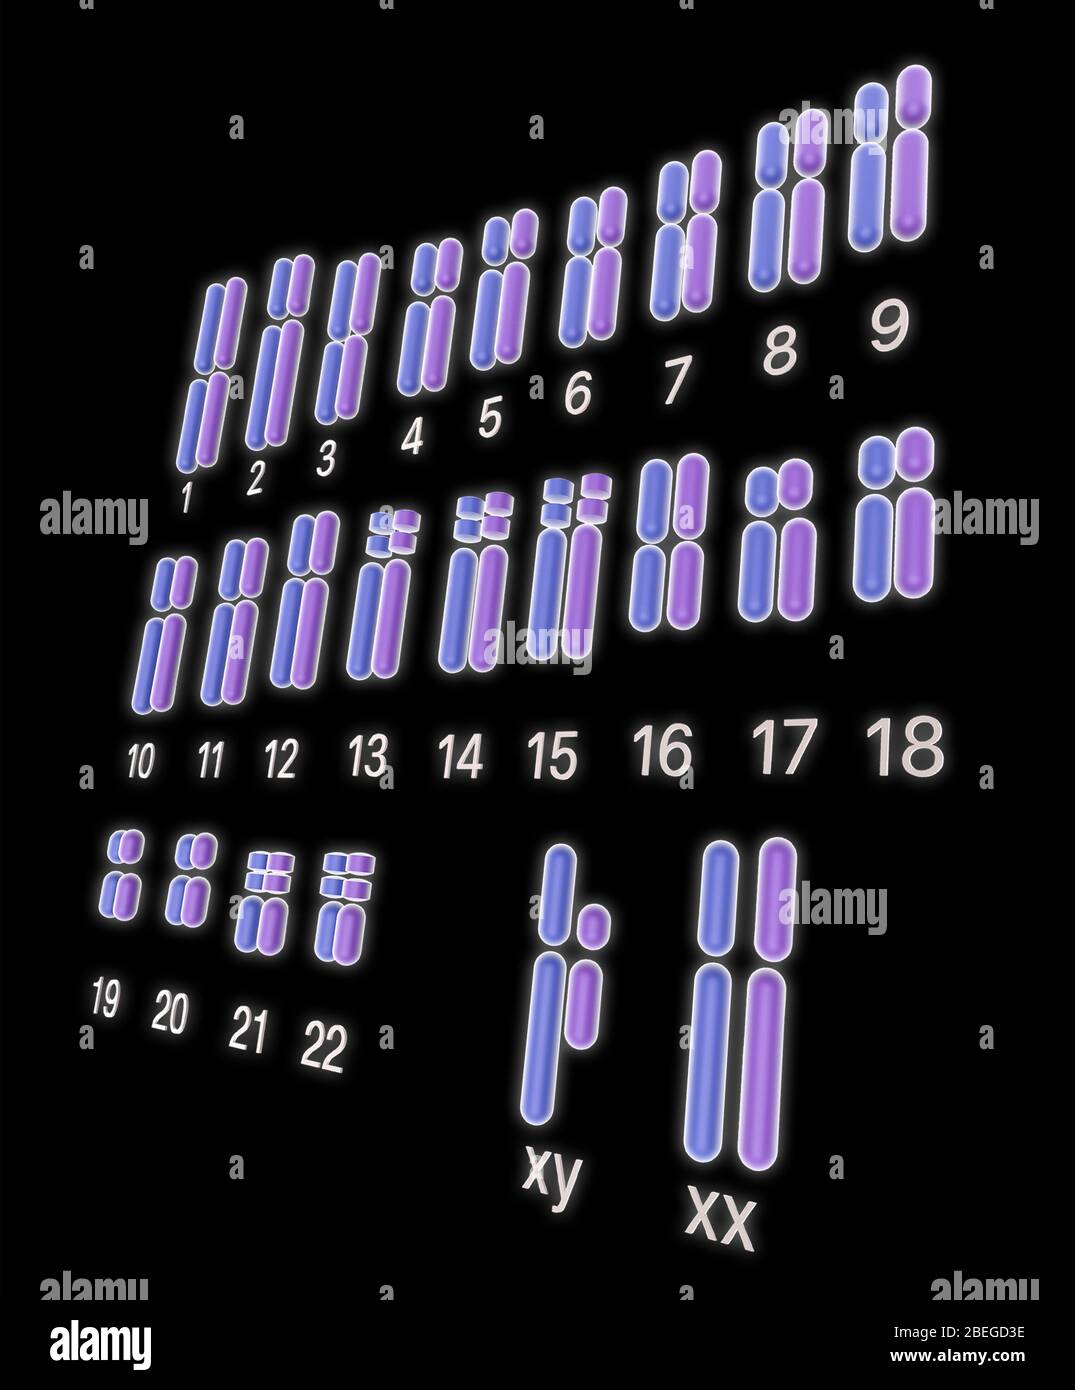 Caryotype, illustration Banque D'Images